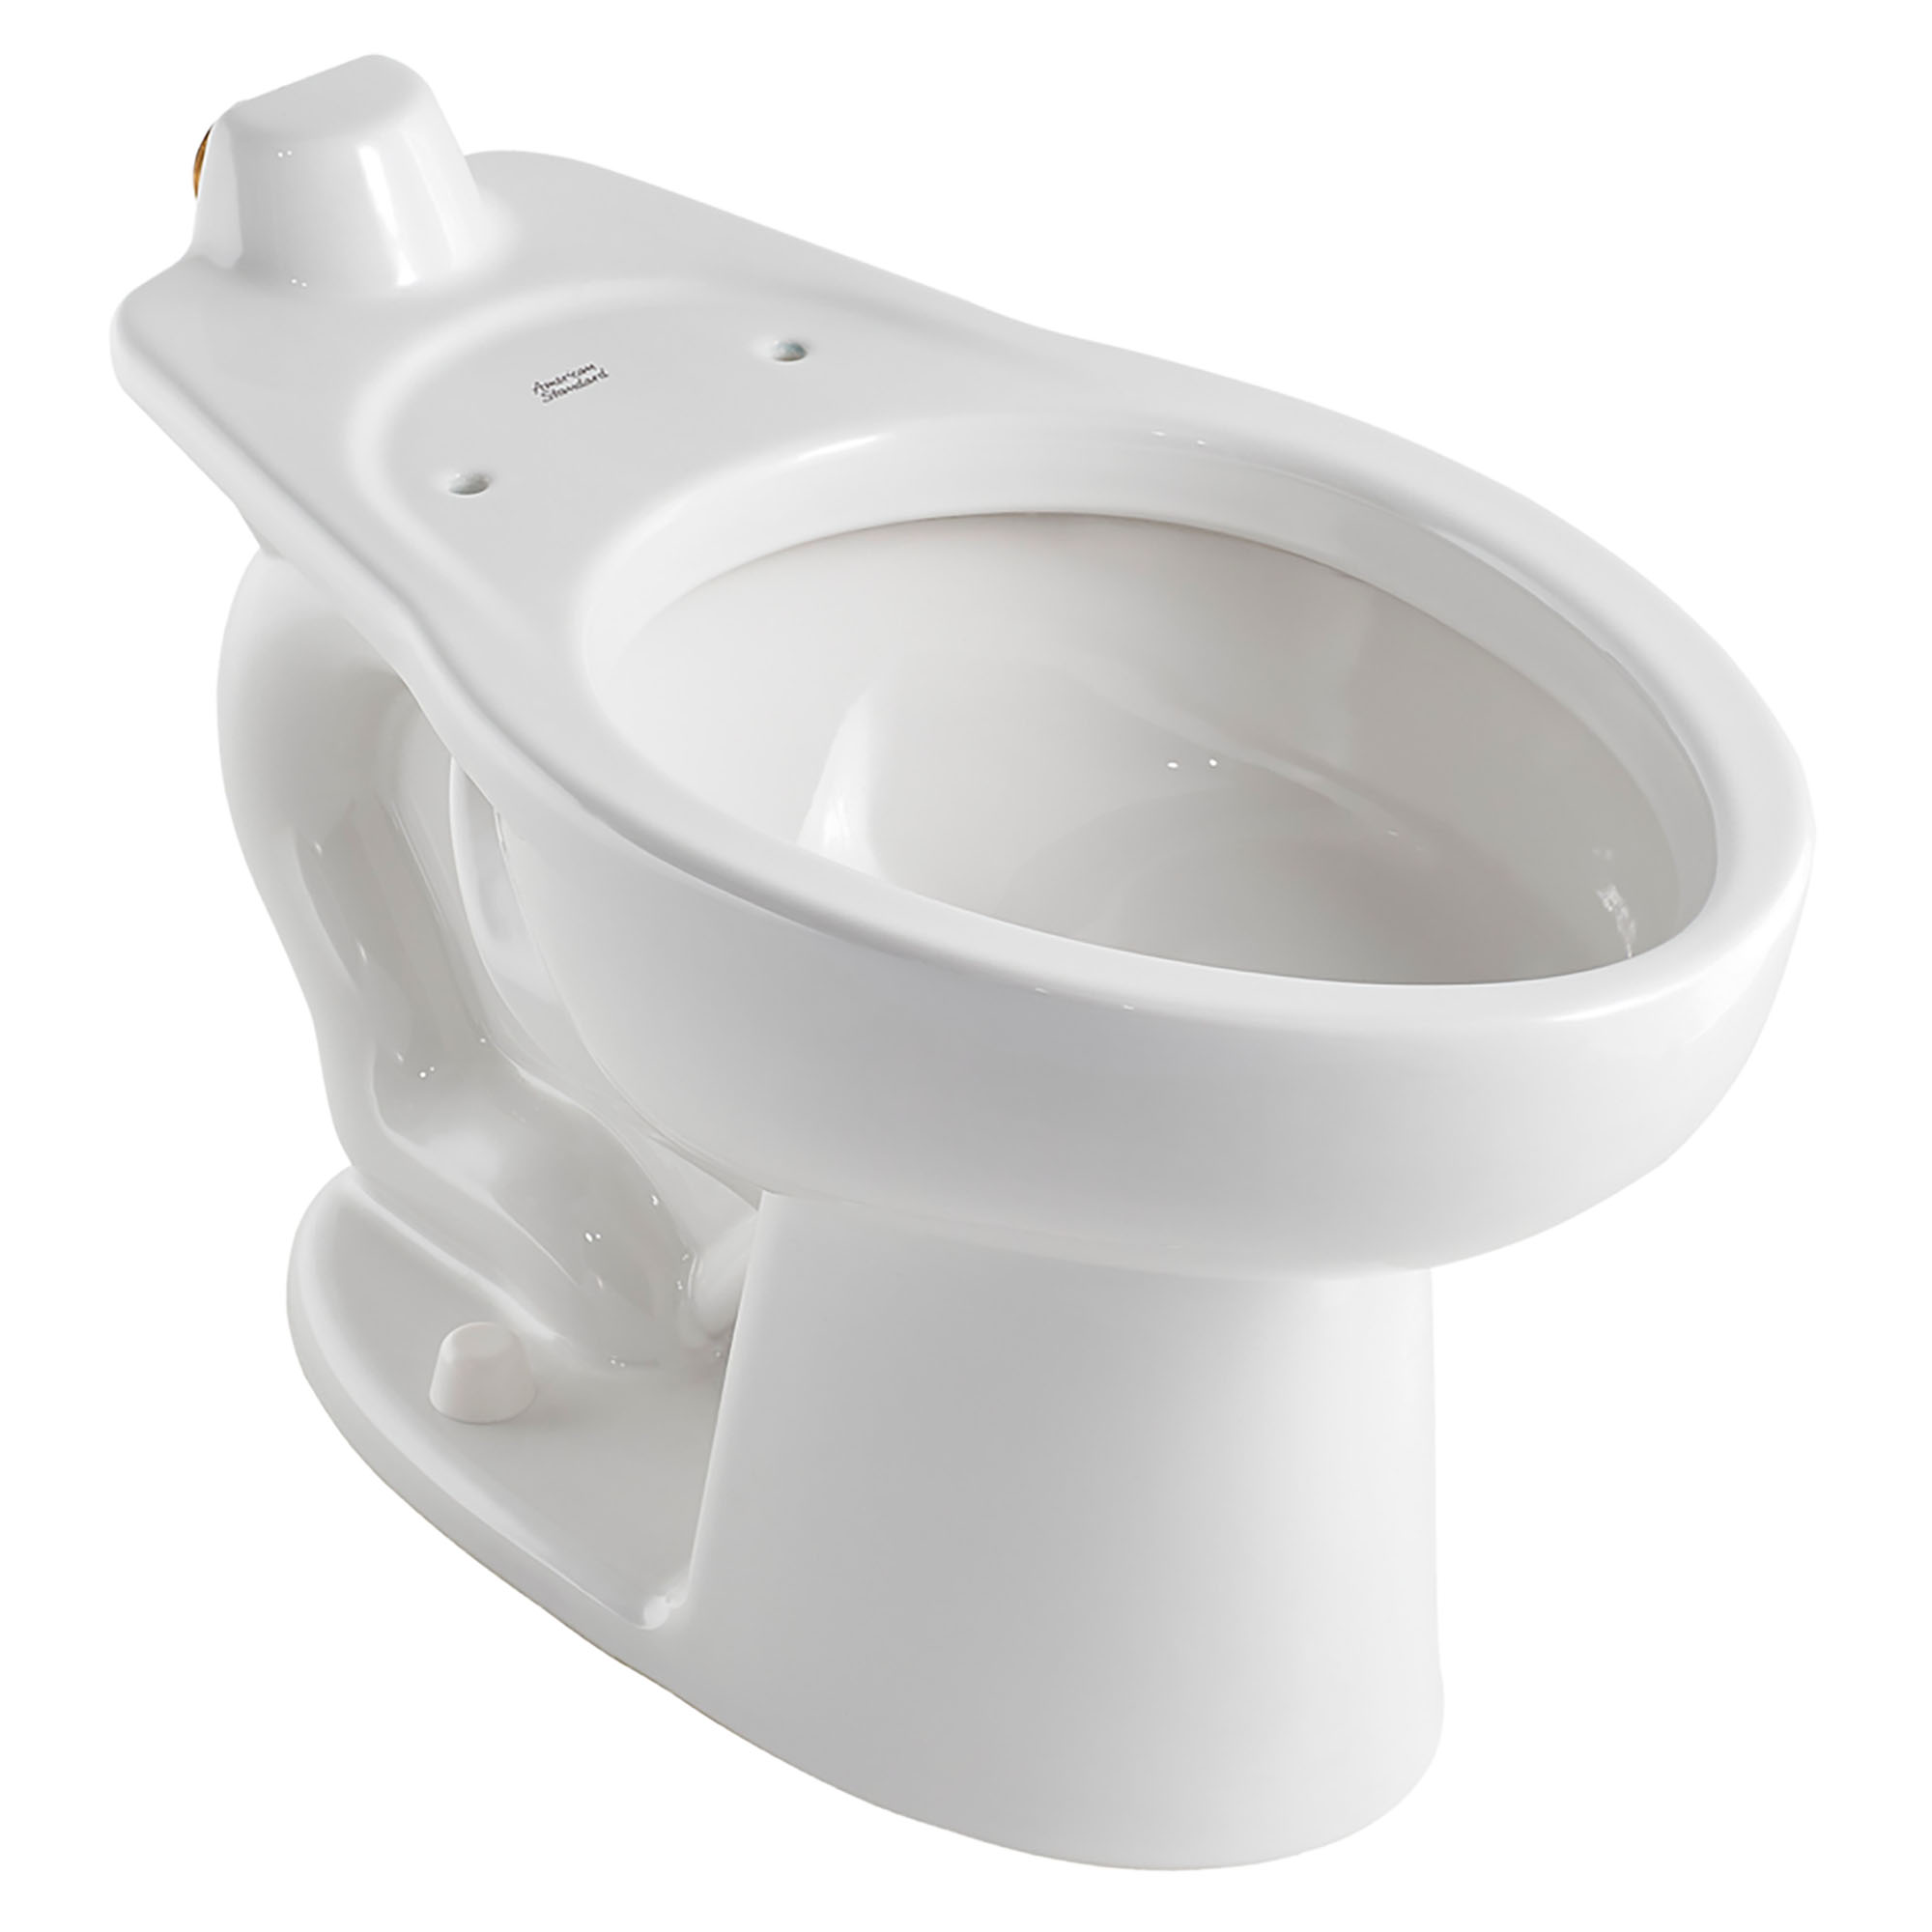 Madera™ 1.1 – 1.6 gpf (4.2 – 6.0 Lpf) 15" Height Back Spud Elongated EverClean® Bowl With Bedpan Lugs